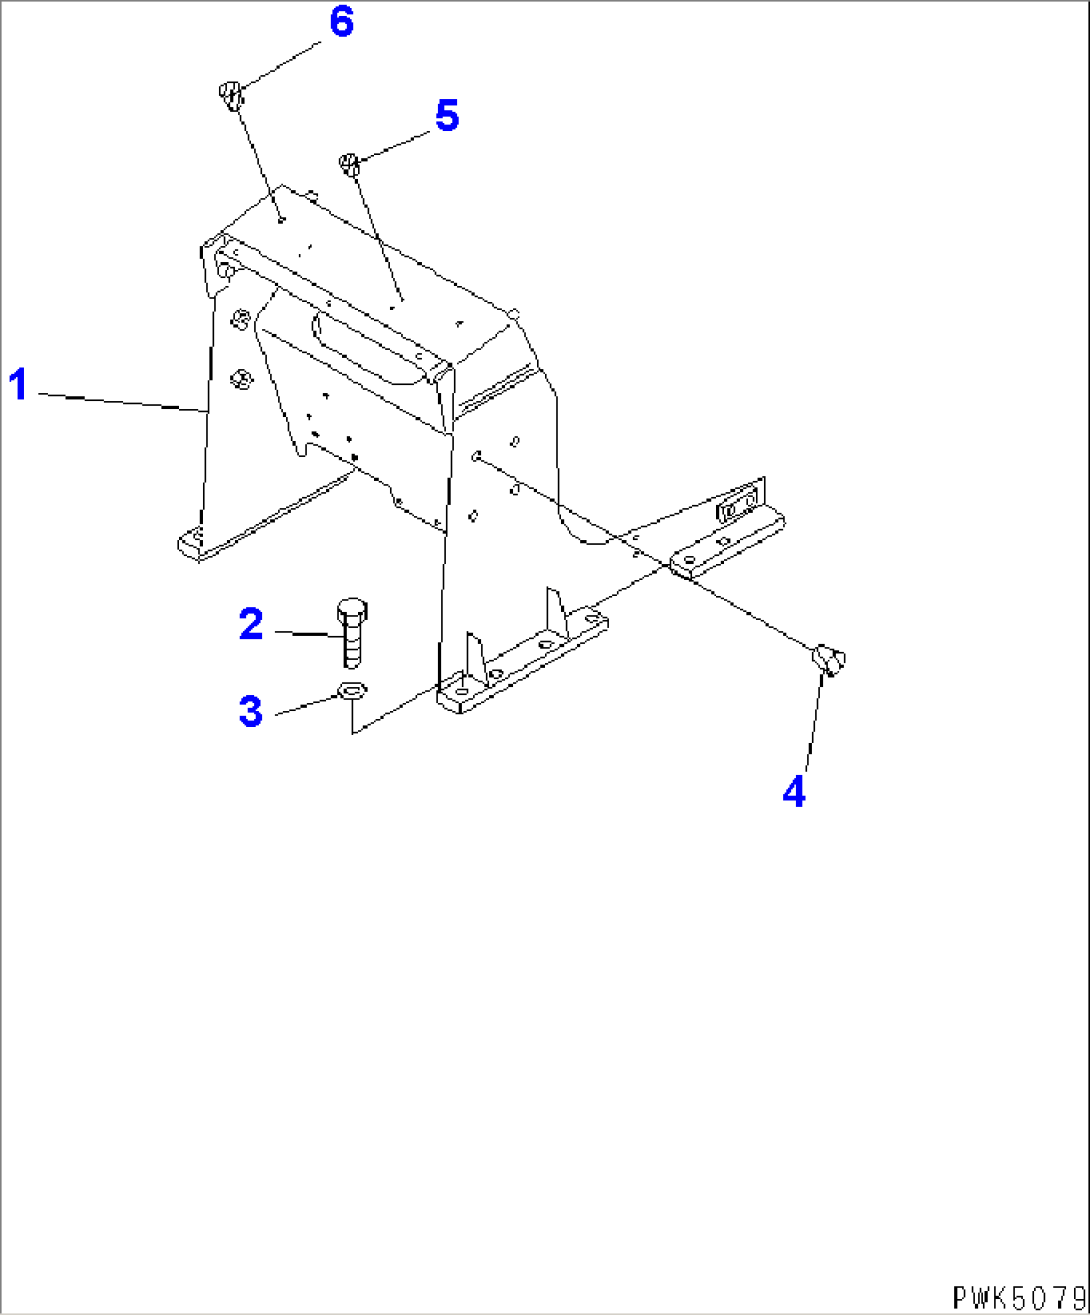 SIDE FRAME (FOR ANGLE DOZER) (FOR 2 LEVERS STEERING)